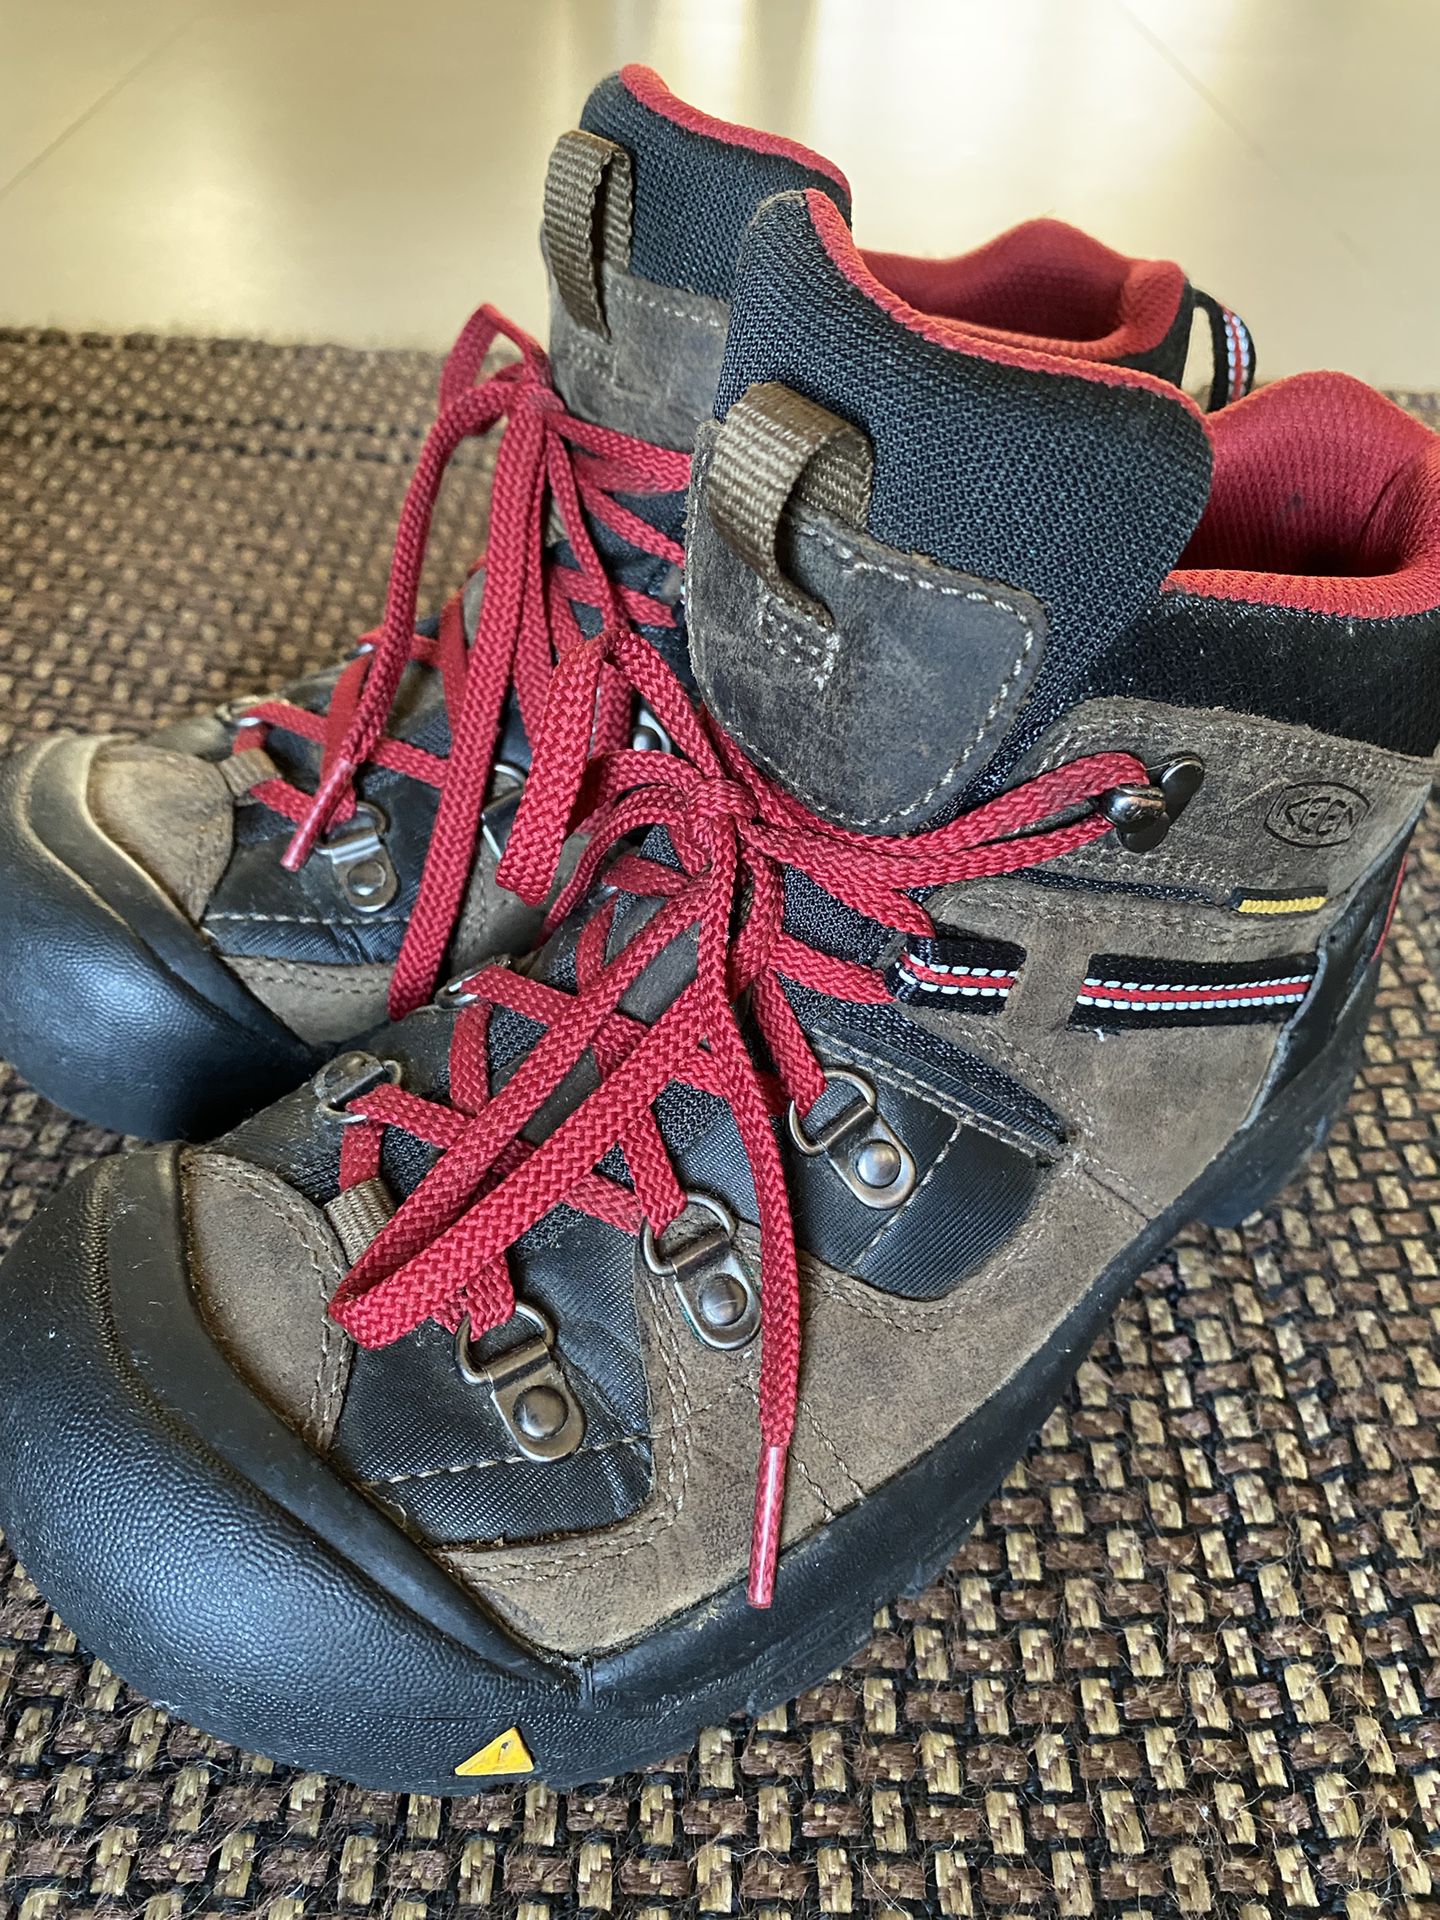 Size 4 Keen; Youth/Boys Winter Boots